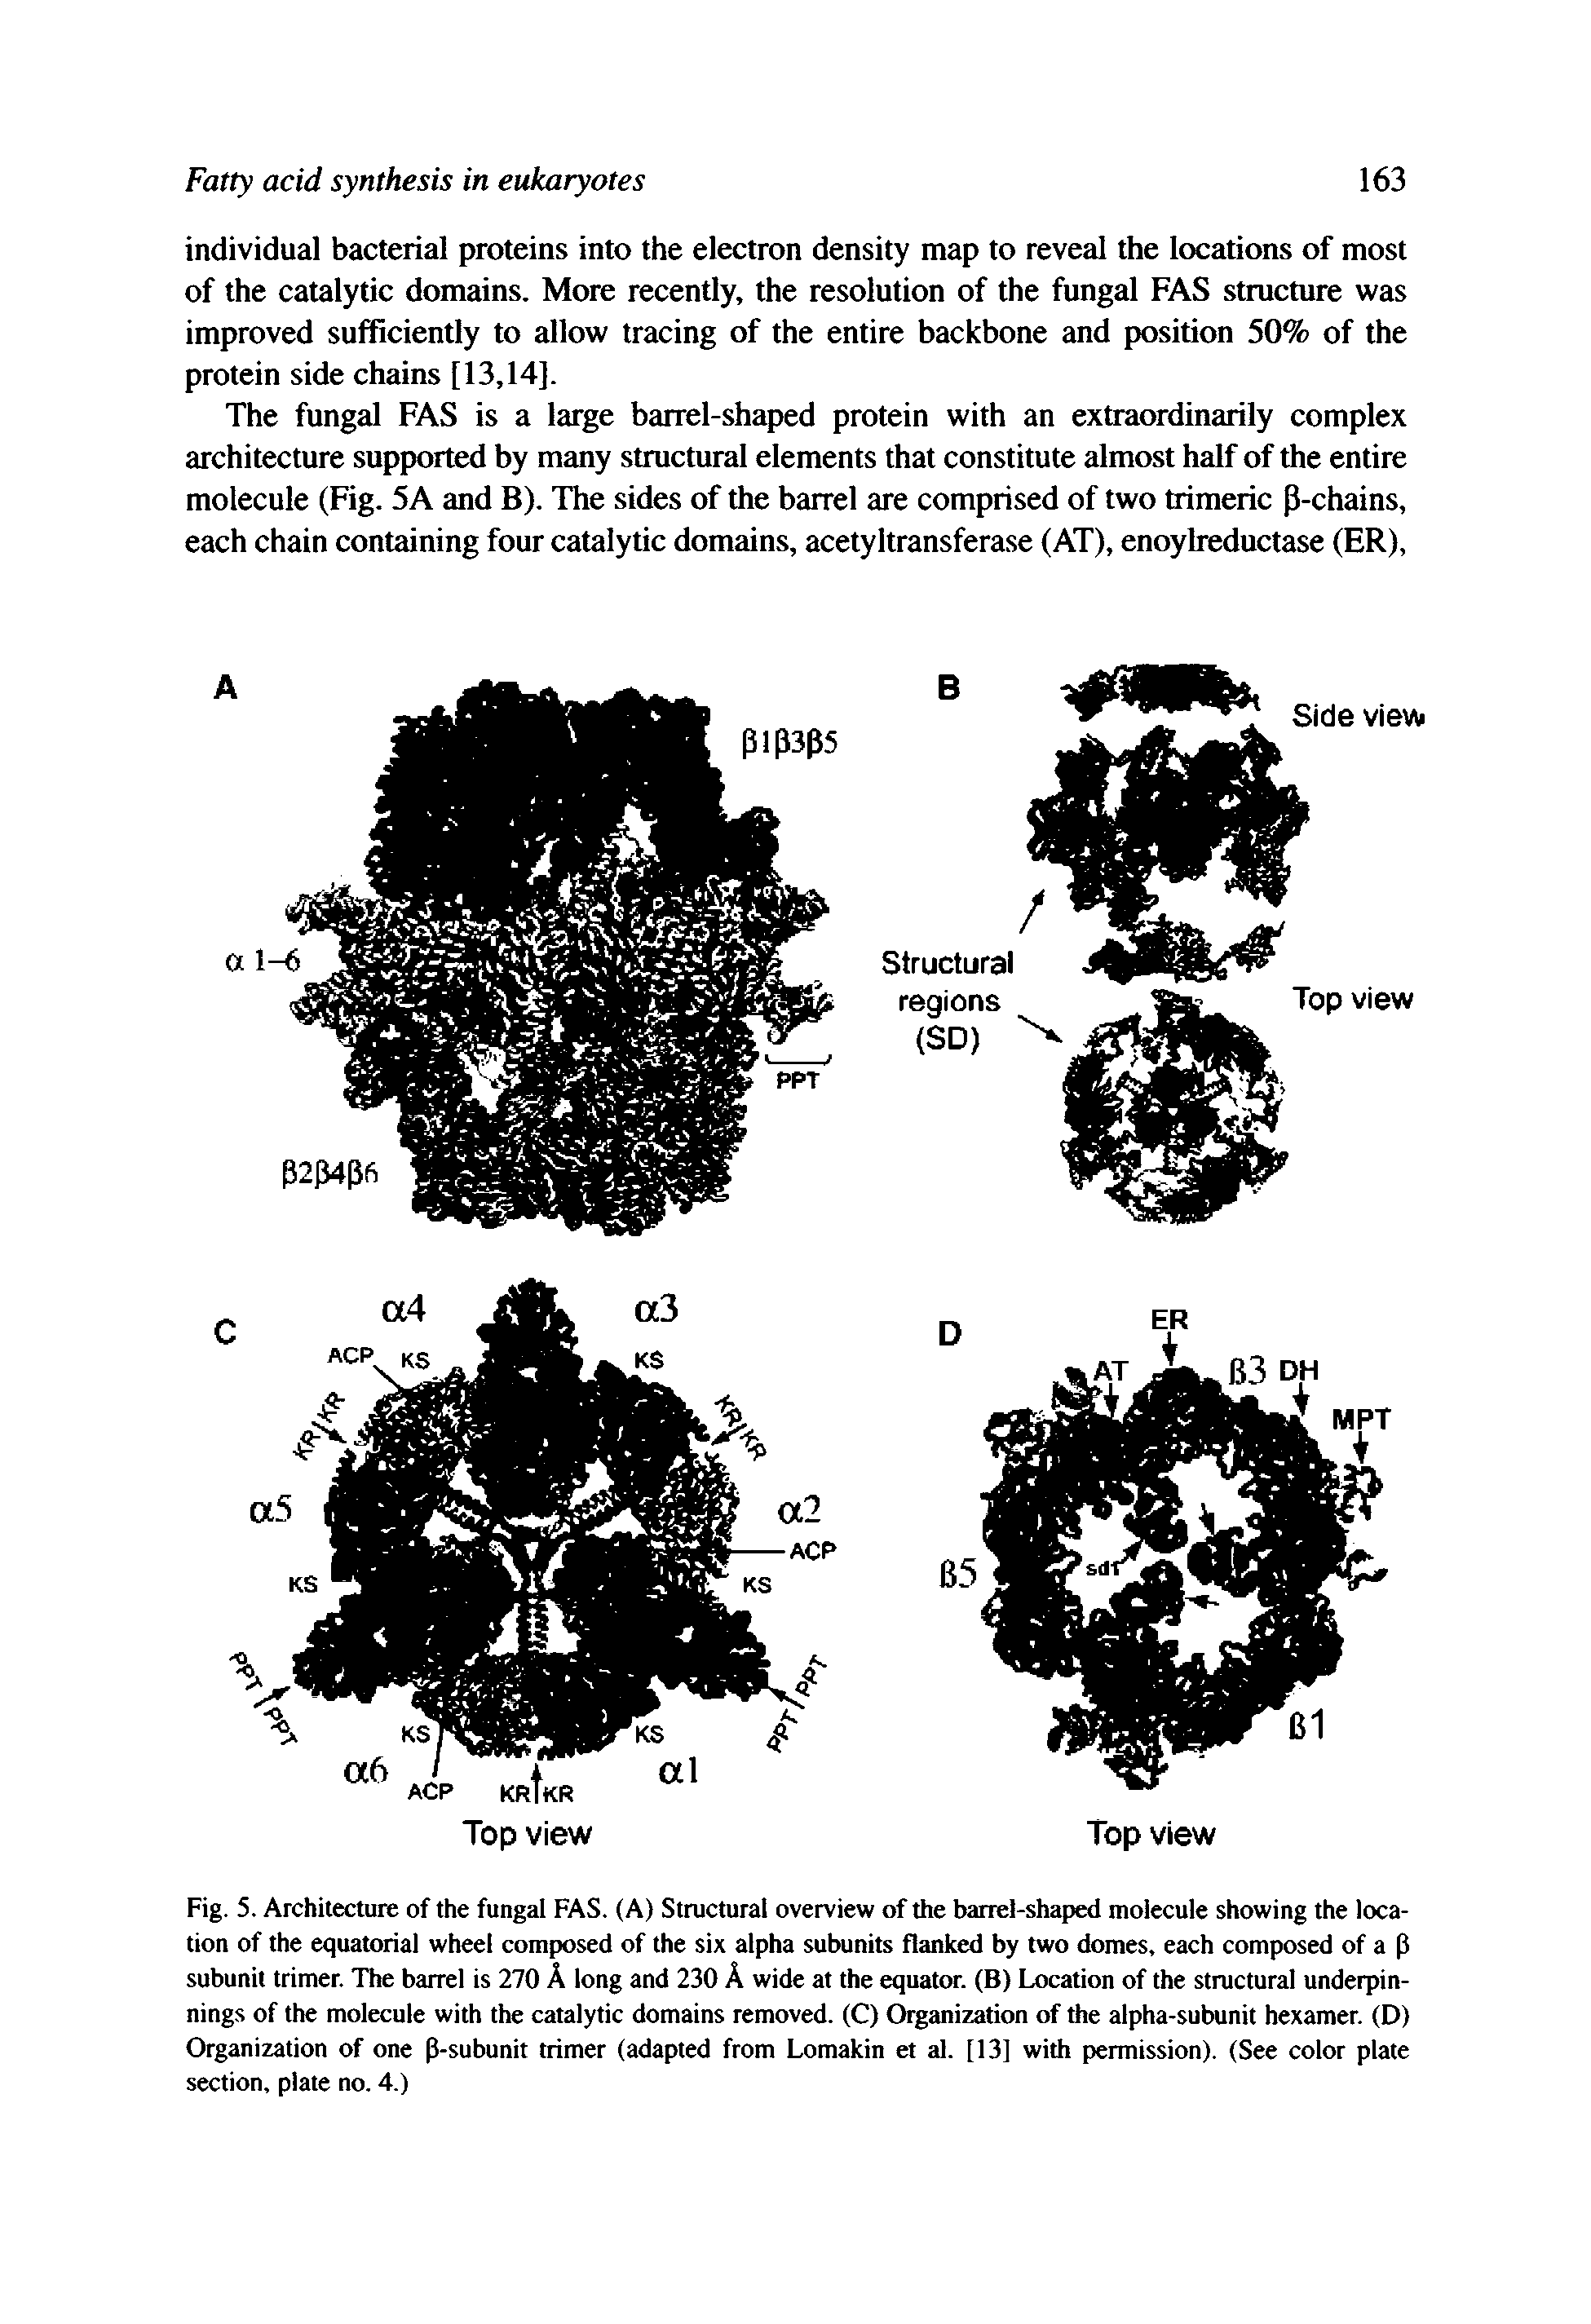 Fig. 5. Architecture of the fungal FAS. (A) Structural overview of the barrel-shaped molecule showing the location of the equatorial wheel composed of the six alpha subunits flanked by two domes, each composed of a p subunit trimer. The barrel is 270 A long and 230 A wide at the equator. (B) Location of the structural underpinnings of the molecule with the catalytic domains removed. (C) Organization of the alpha-subunit hexamer. (D) Organization of one p-subunit trimer (adapted from Lomakin et al. [13] with permission). (See color plate section, plate no. 4.)...